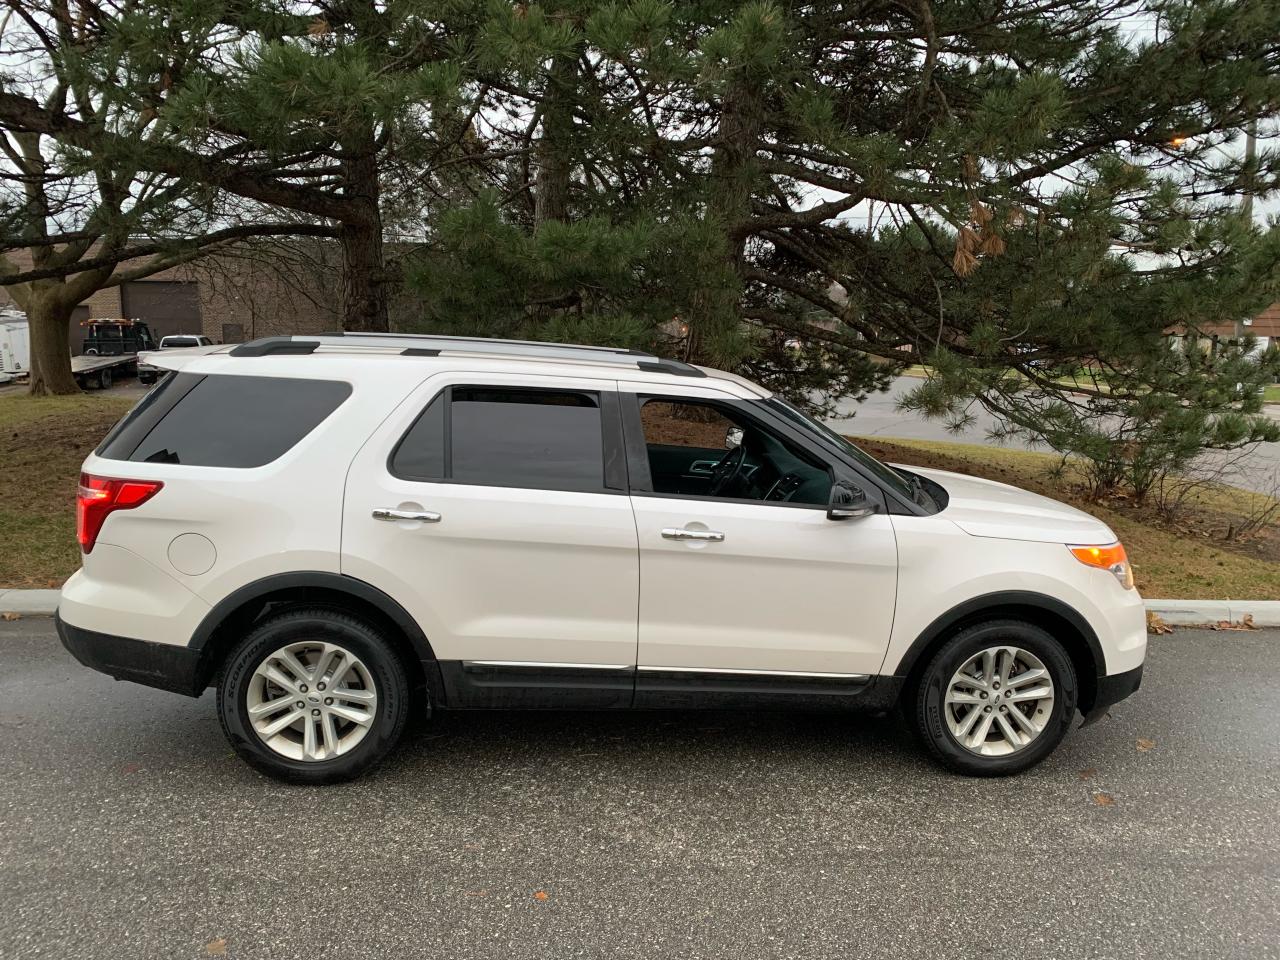 2013 Ford Explorer XLT-FRONT WHEEL DRIVE-1 LOCAL OWNER! GPS/LEATHER - Photo #2